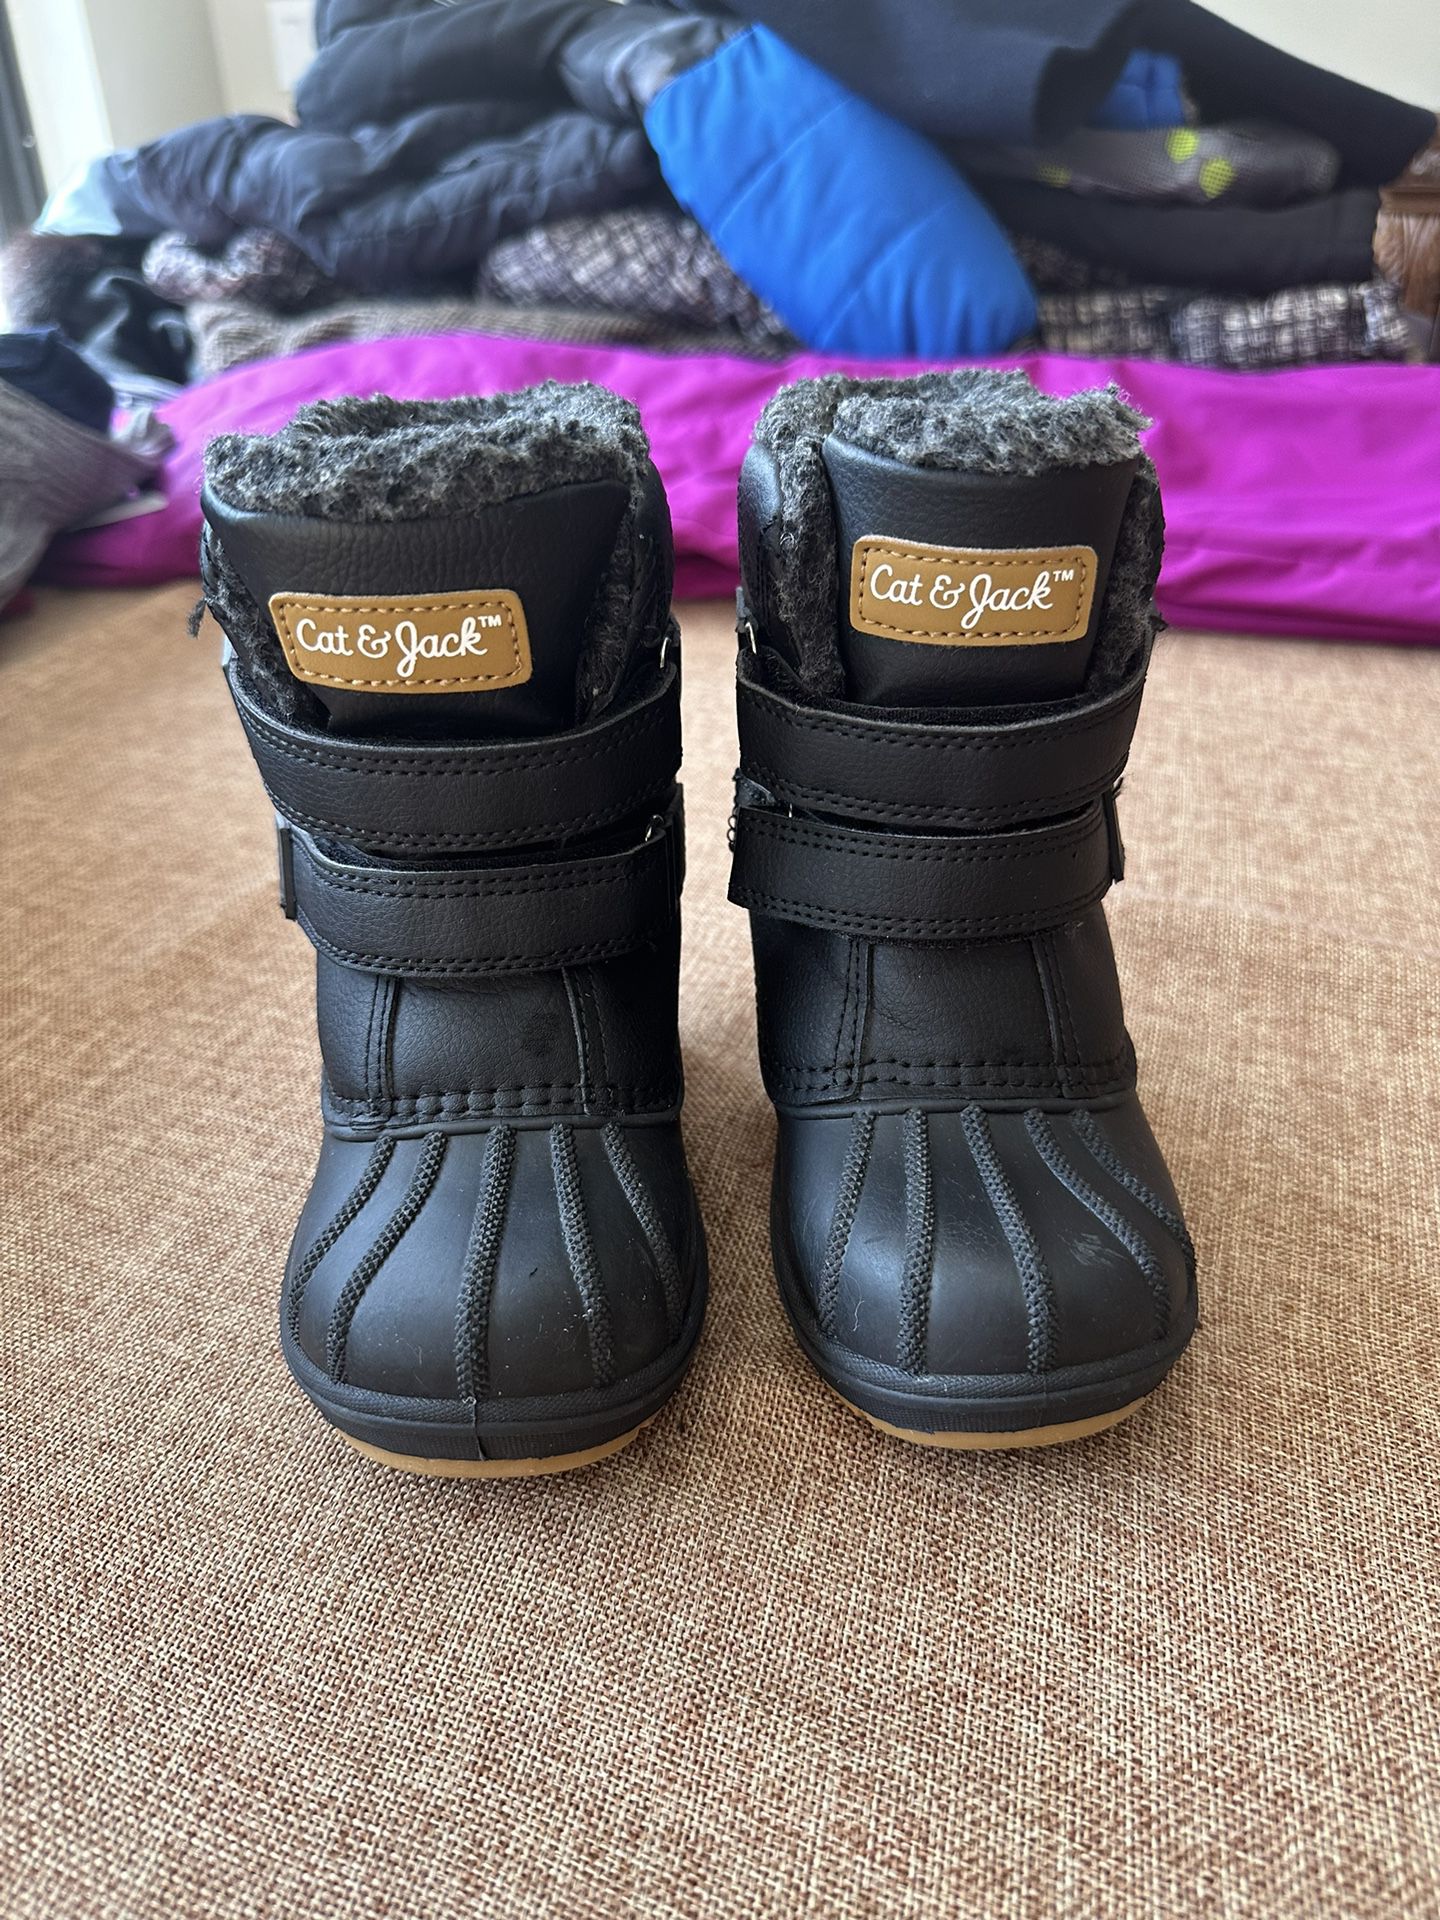 Cat & Jack Toddler Snow Boots Size 9T